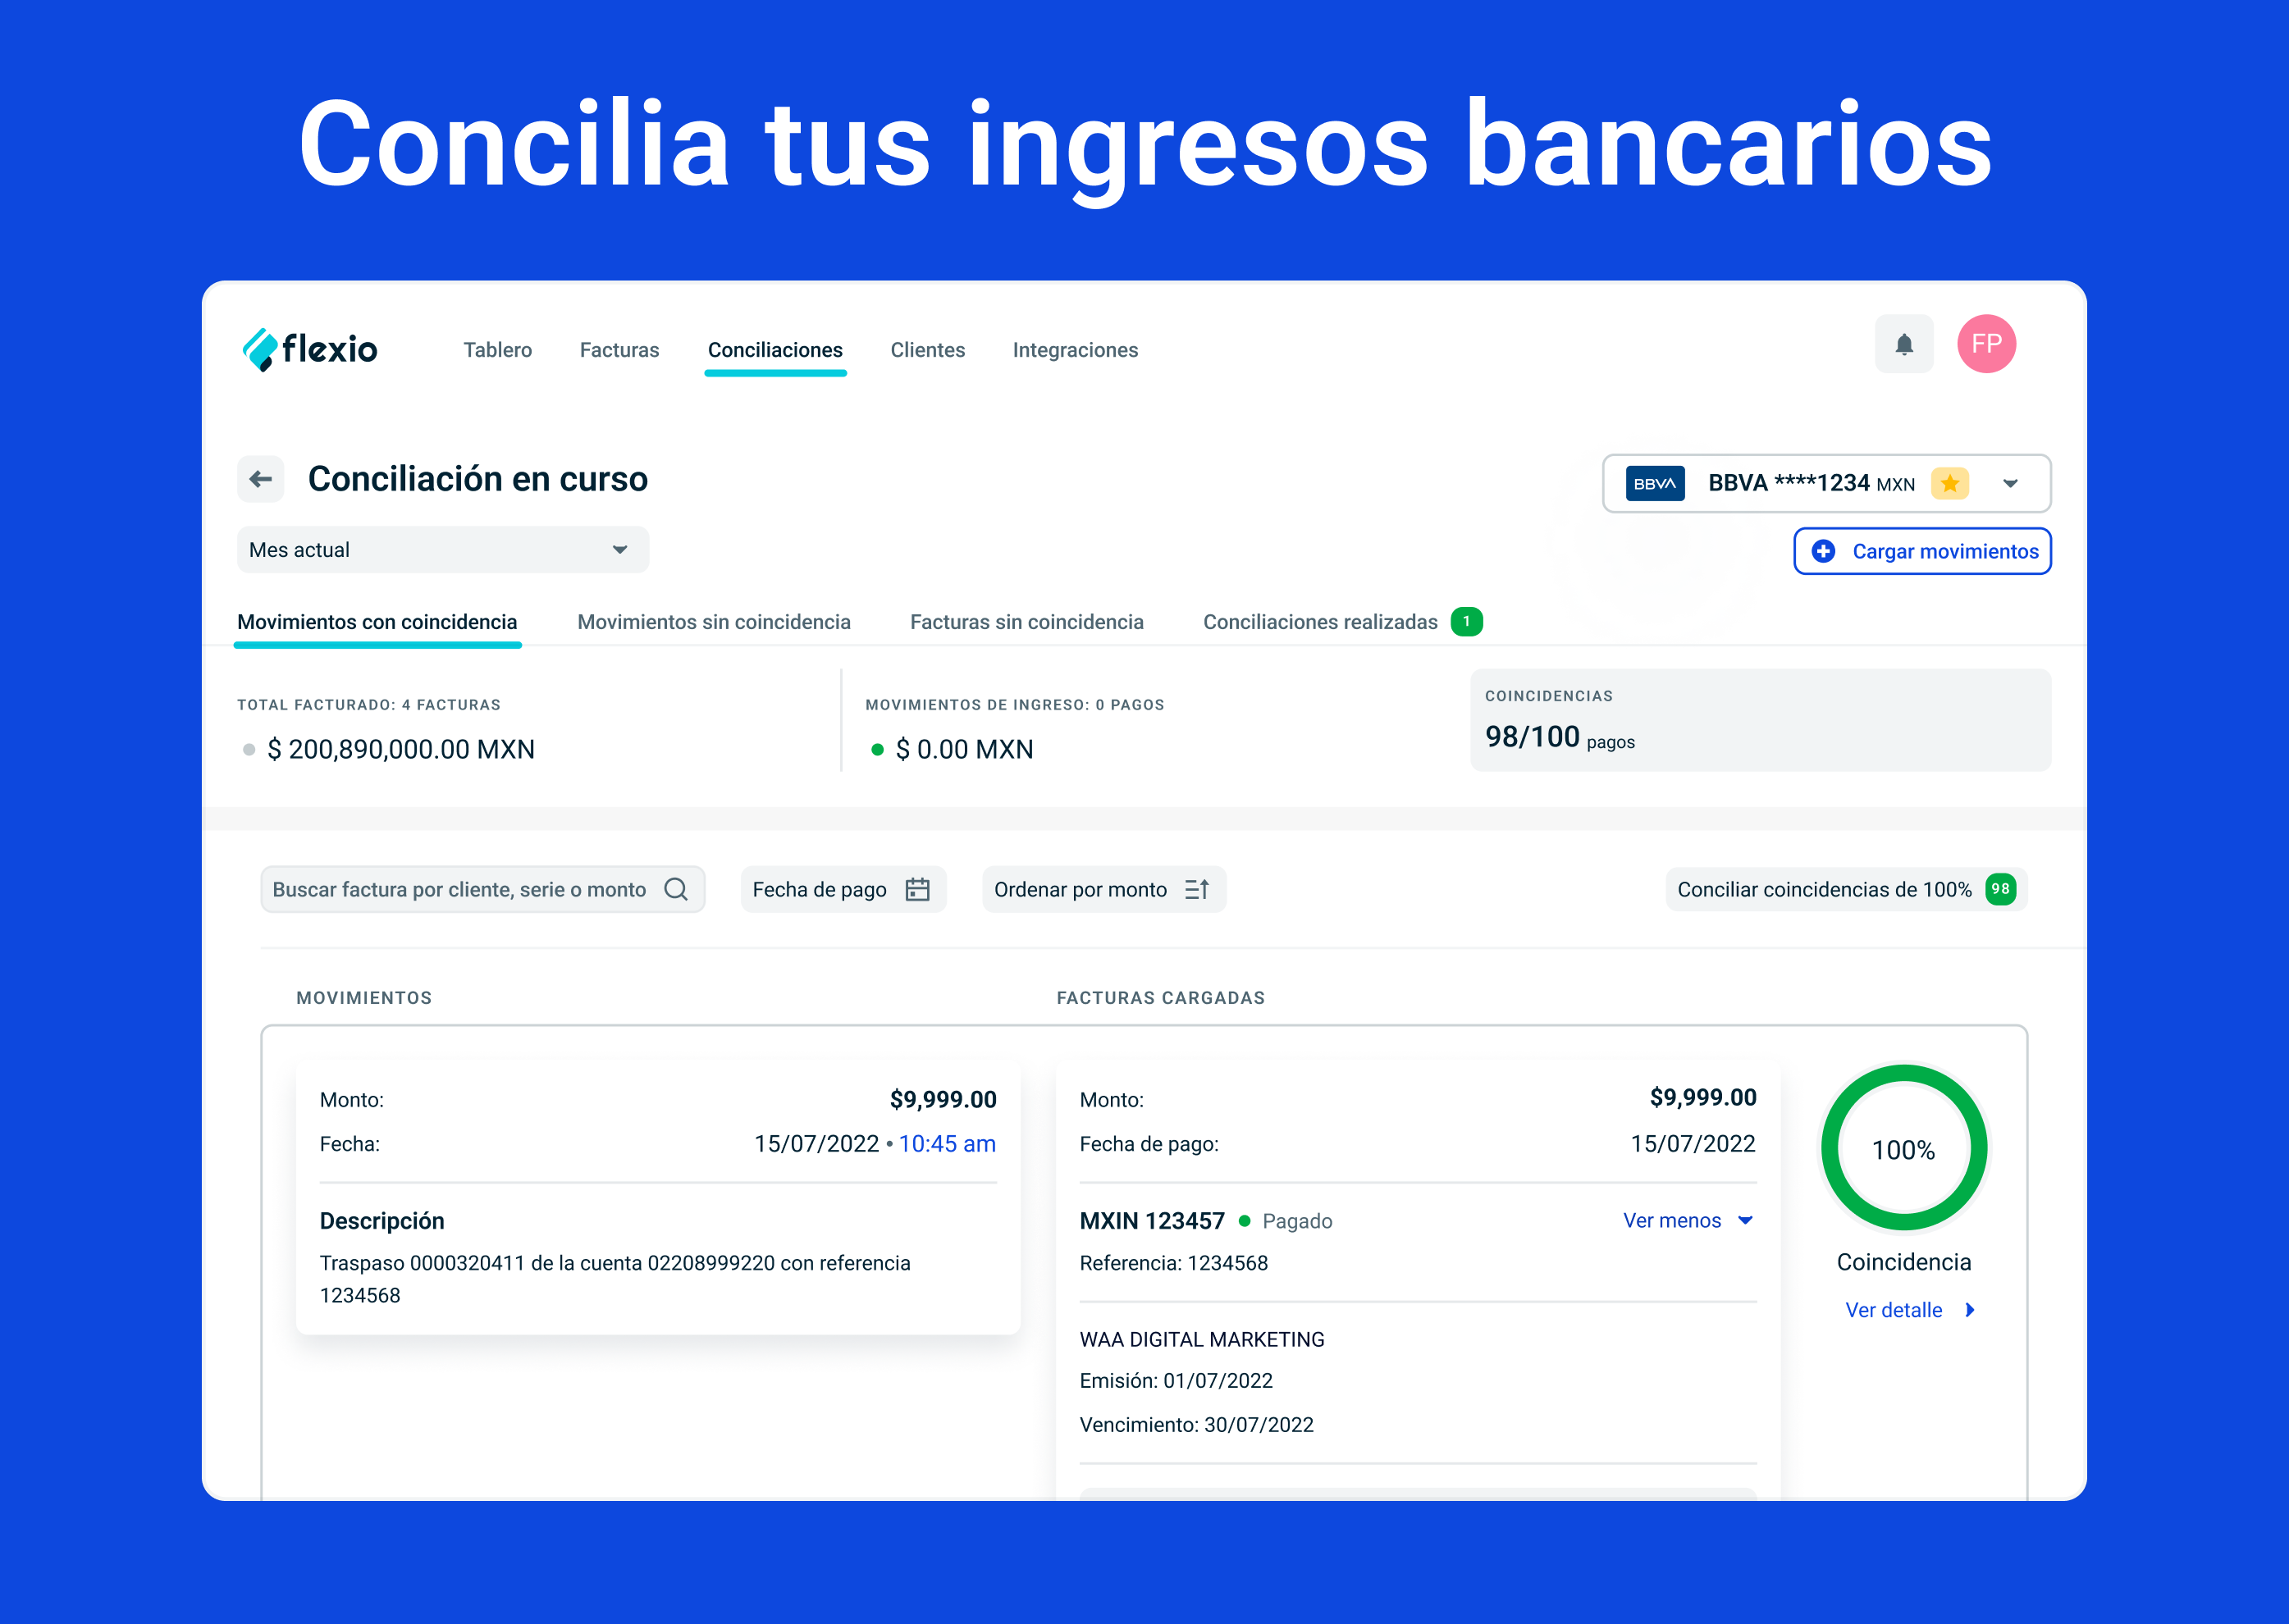 Save time by automatically reconciling your bank income and invoices, and don't worry about manually marking each invoice as paid within Flexio.